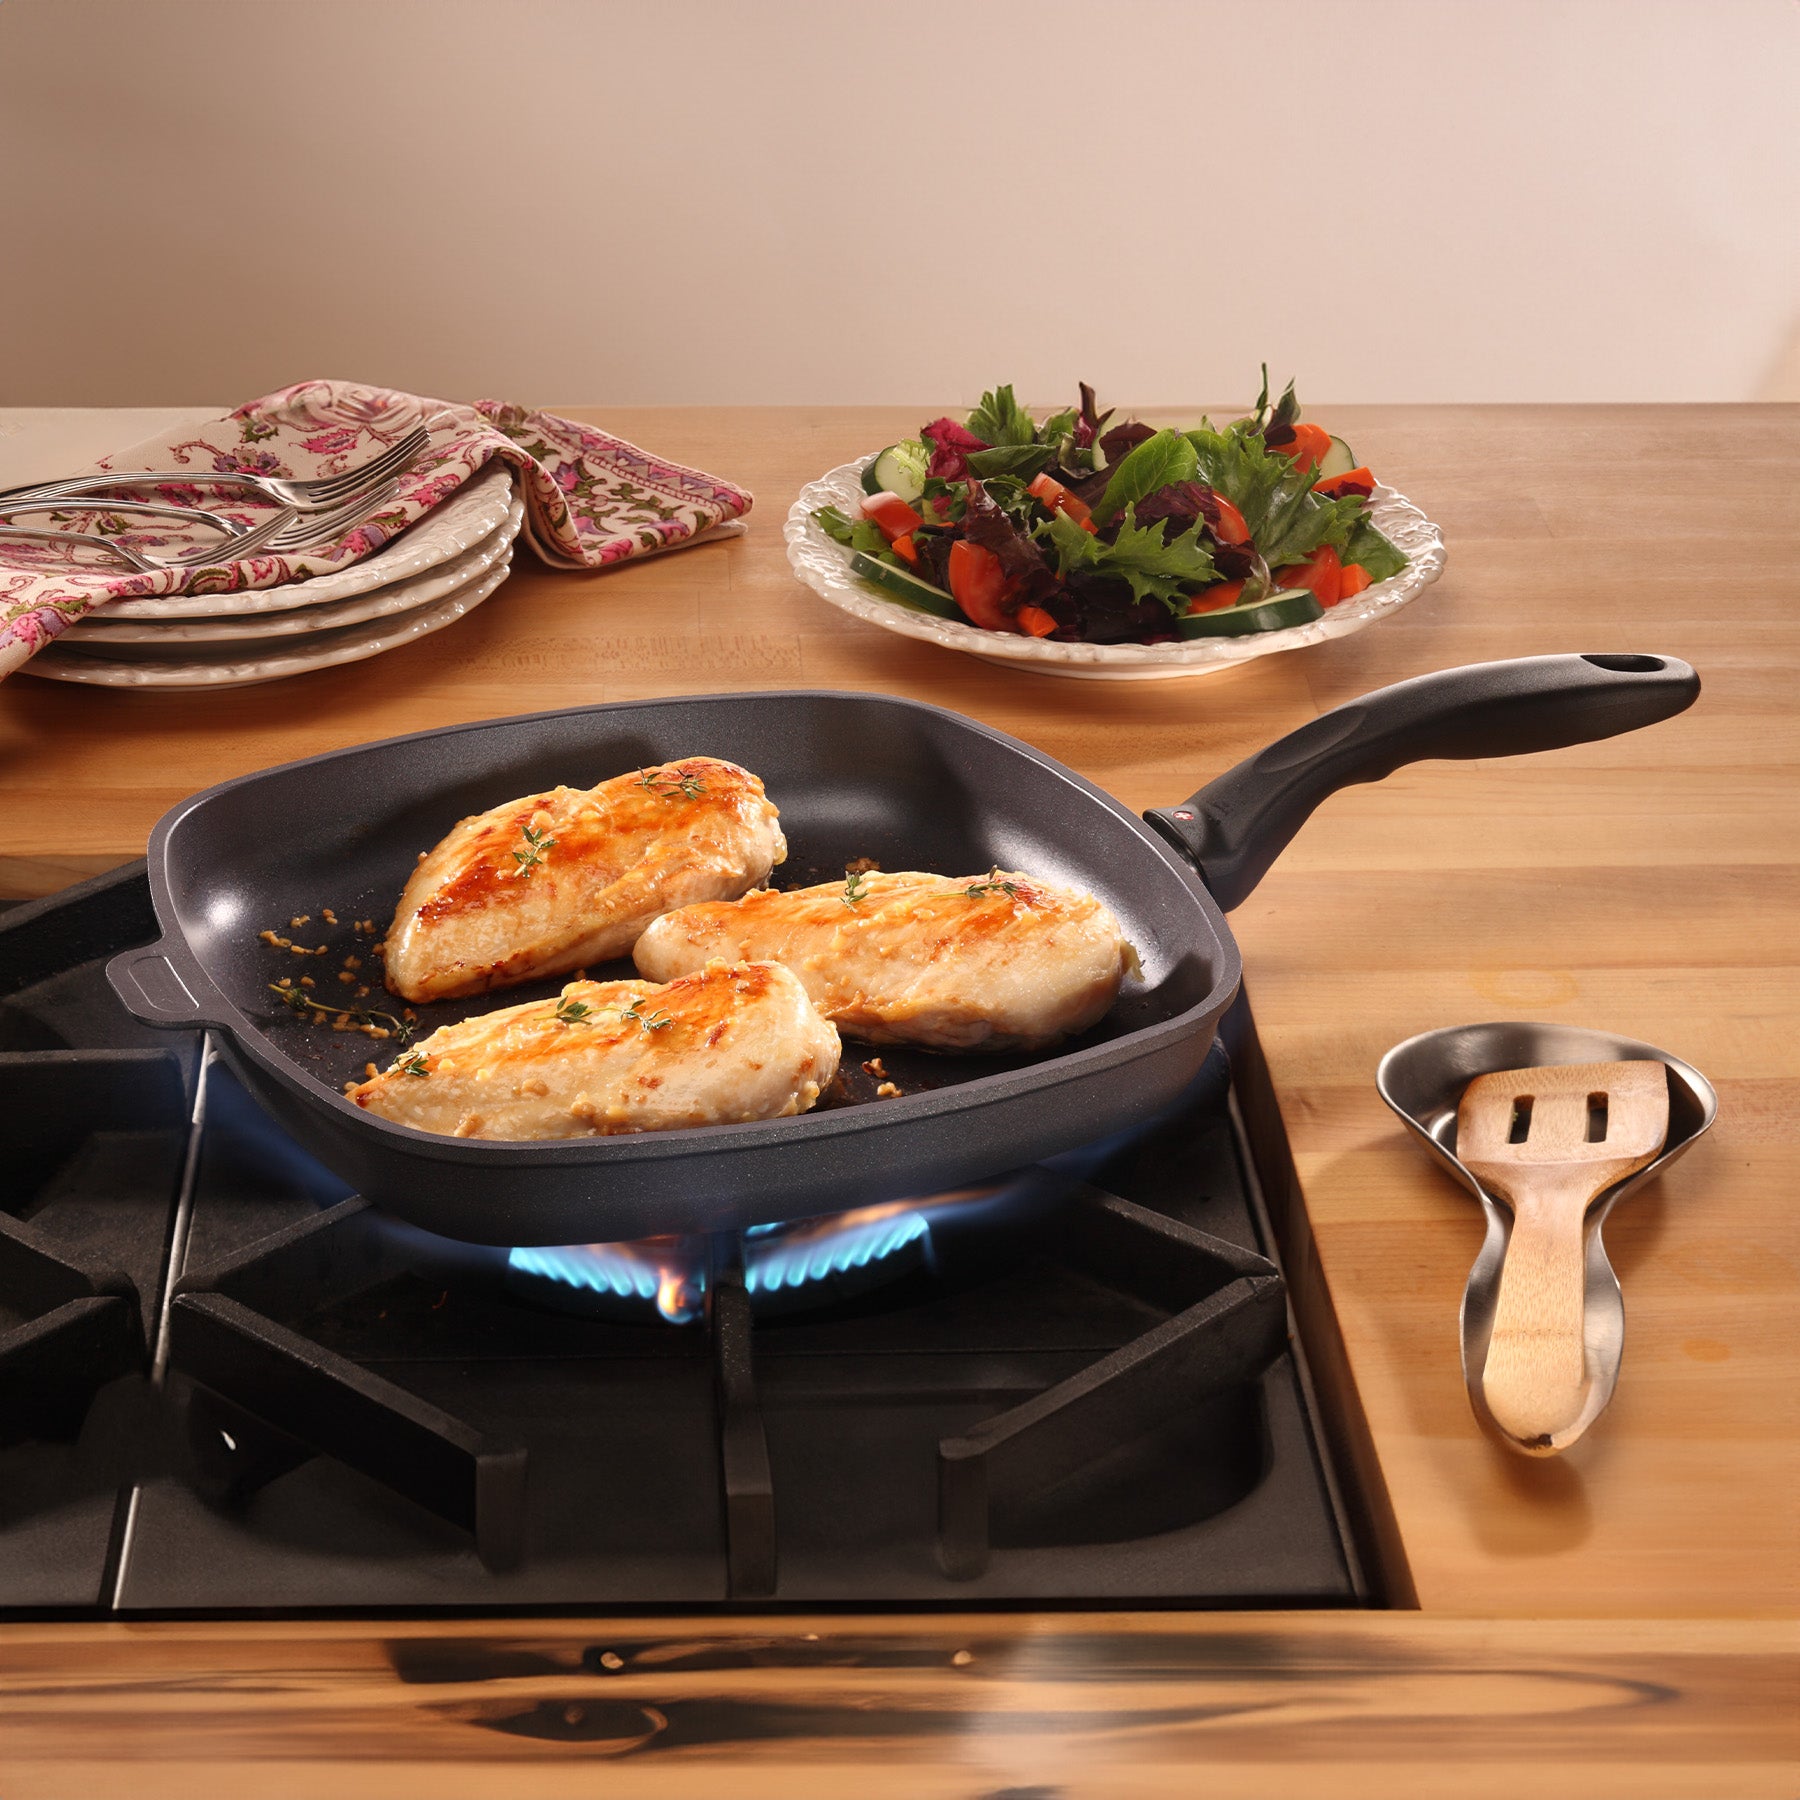 HD Nonstick 11" x 11" Square Fry Pan - Induction in use on kitchen gas stove top